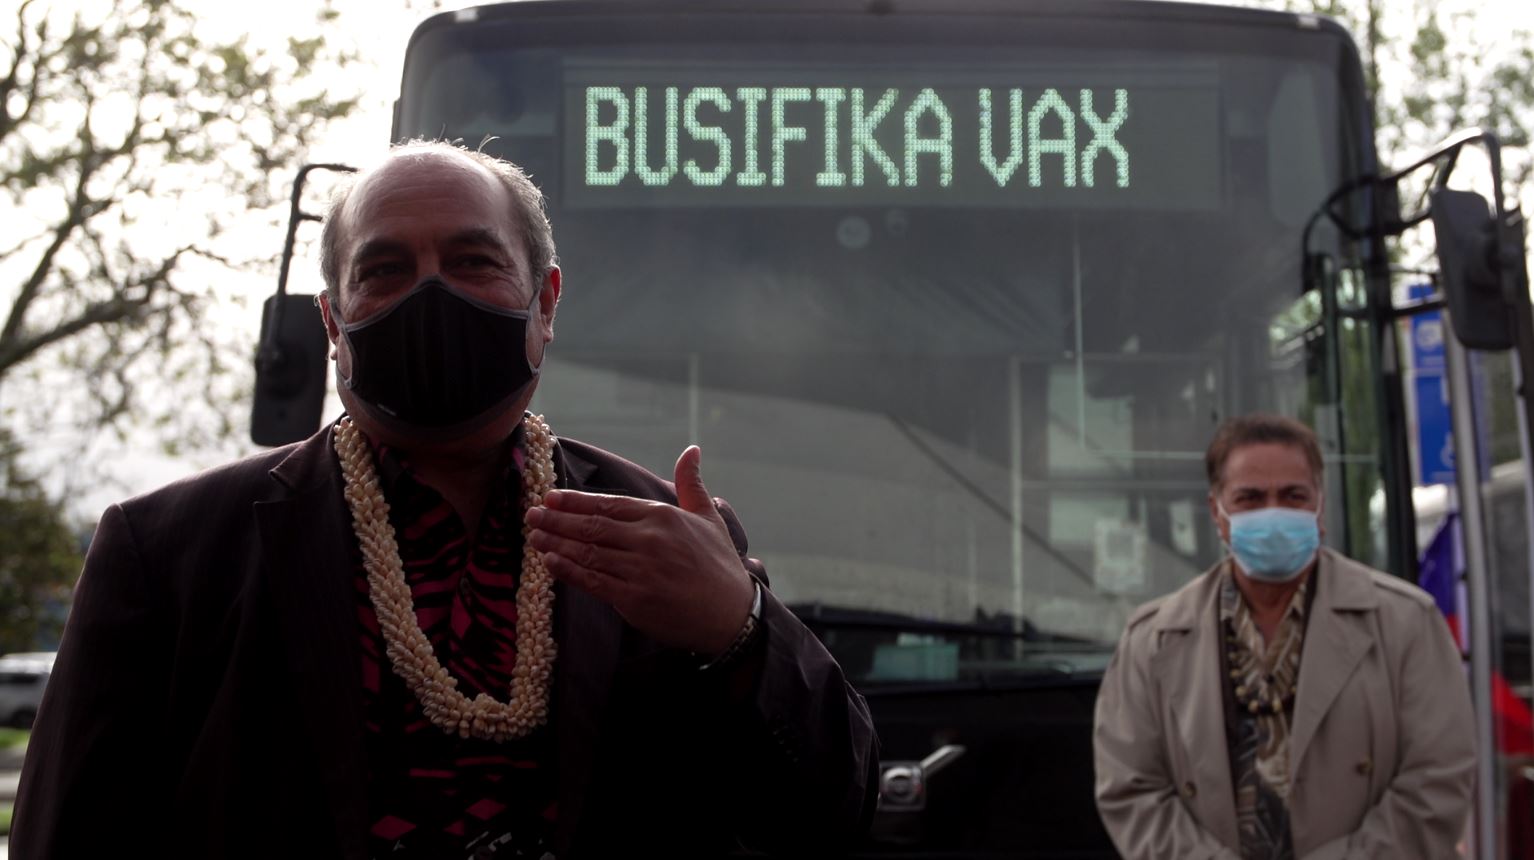 The first of two community-led buses were launched in Māngere, aptly named 'Busifika Vax'